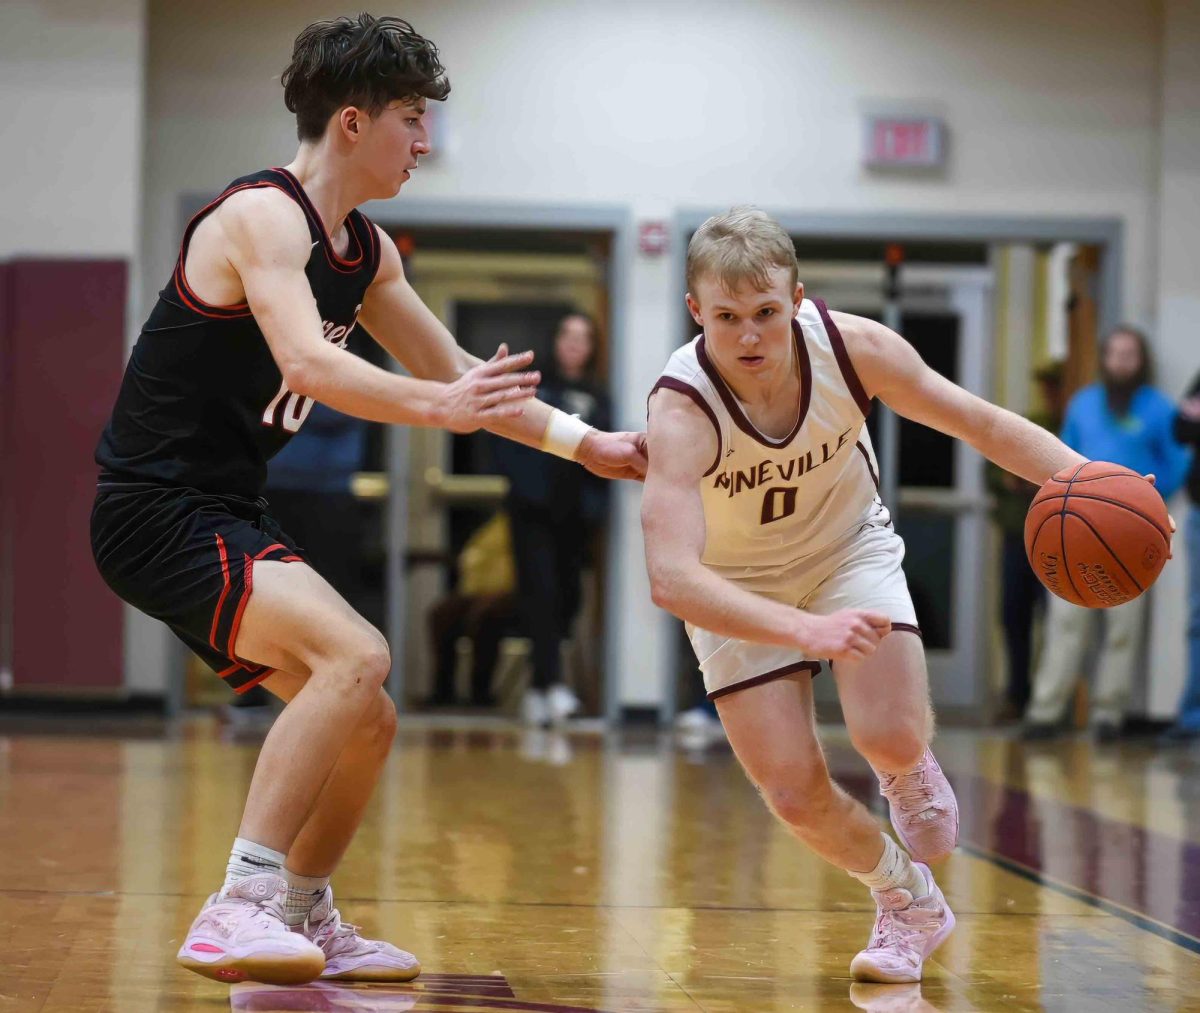 Pineville+guard+Sawyer+Thompson+drove+around+Powell+Countys+Dylan+Carter+in+championship+game+action+Saturday+at+the+Chain+Rock+Classic.+Thompson+scored+25+points+in+the+Mountain+Lions+84-73+win.